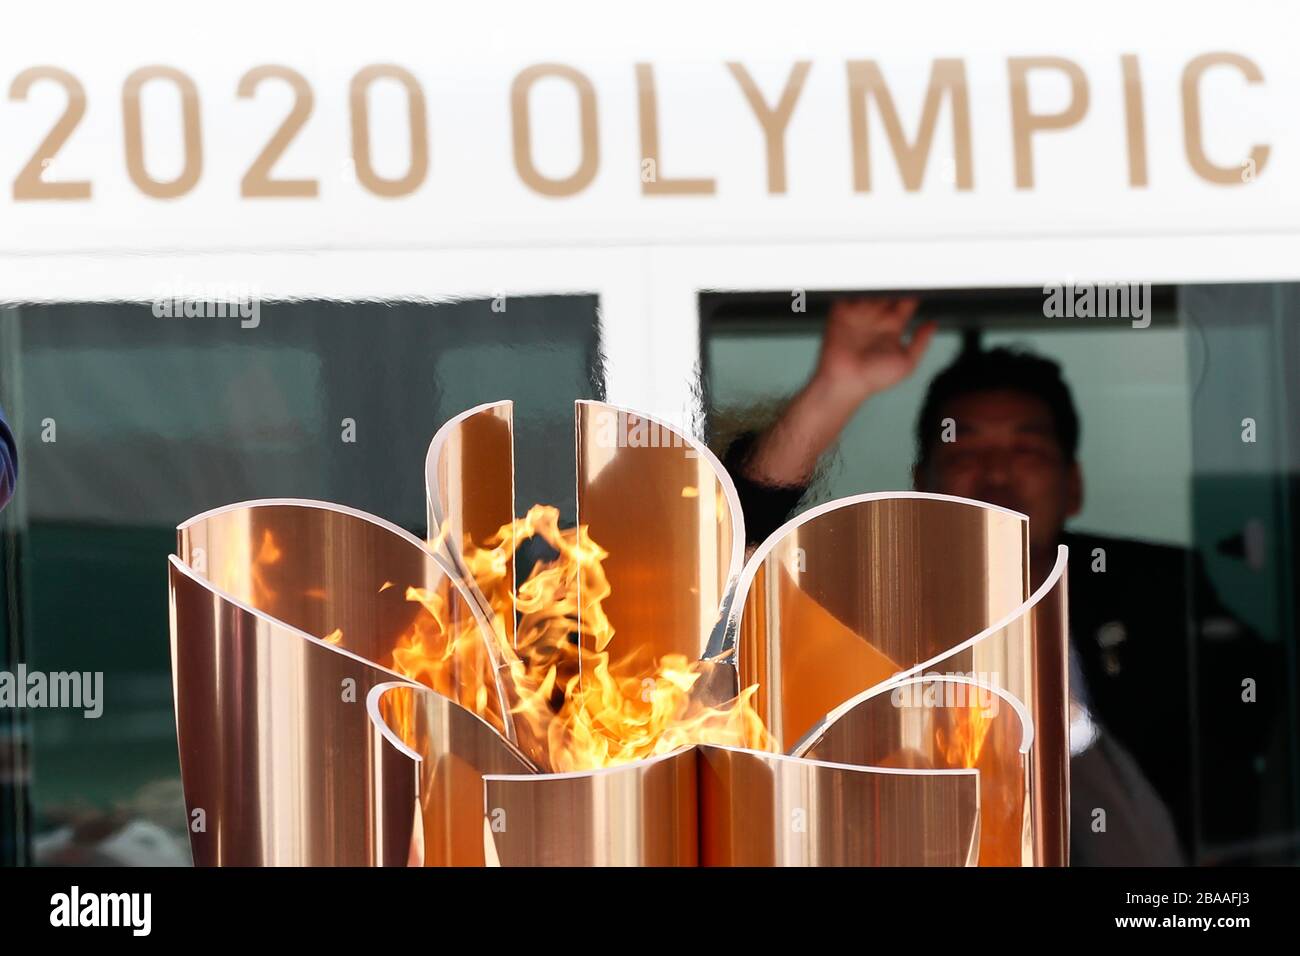 Matsushima, Japan. 23rd Mar, 2020. The Olympic Flame is seen during the Olympic Flame Arrival Ceremony at Japan Air Self-Defense Force (JASDF) Matsushima Base in Miyagi Pr Stock Photo